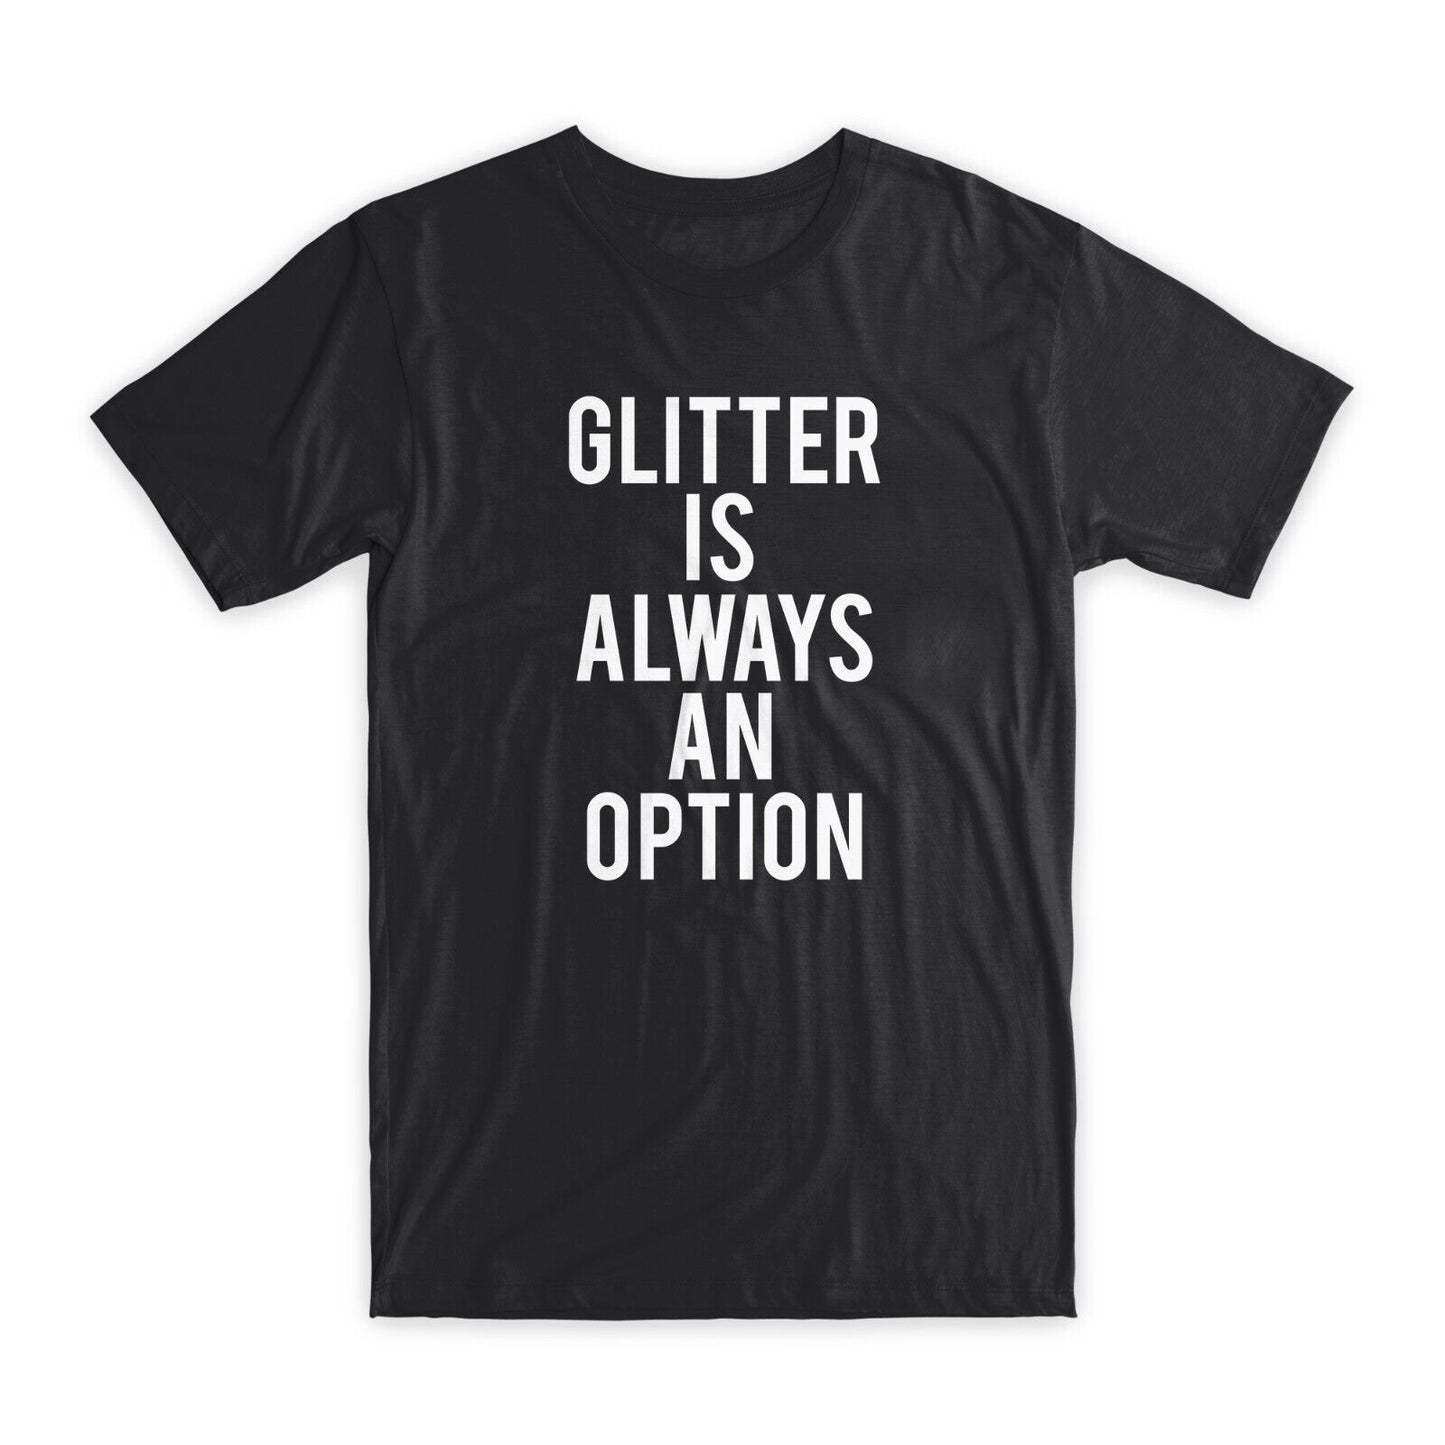 Glitter is Always an Option T-Shirt Premium Cotton Crew Neck Funny Tees Gift NEW